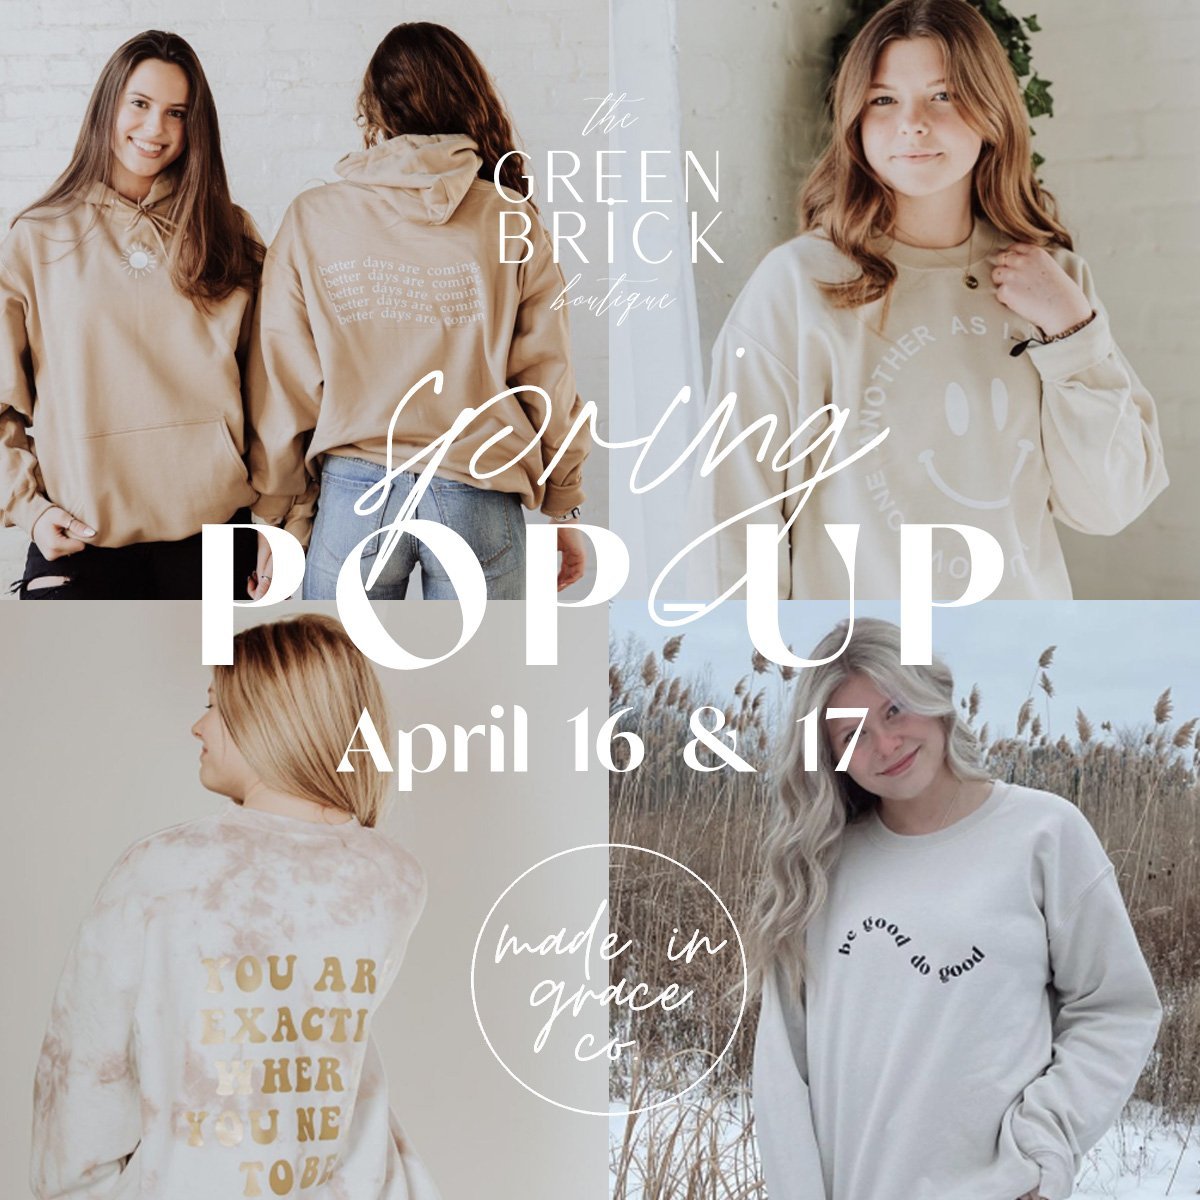 Made In Grace Co. Pop-Up Shop - The Green Brick Boutique